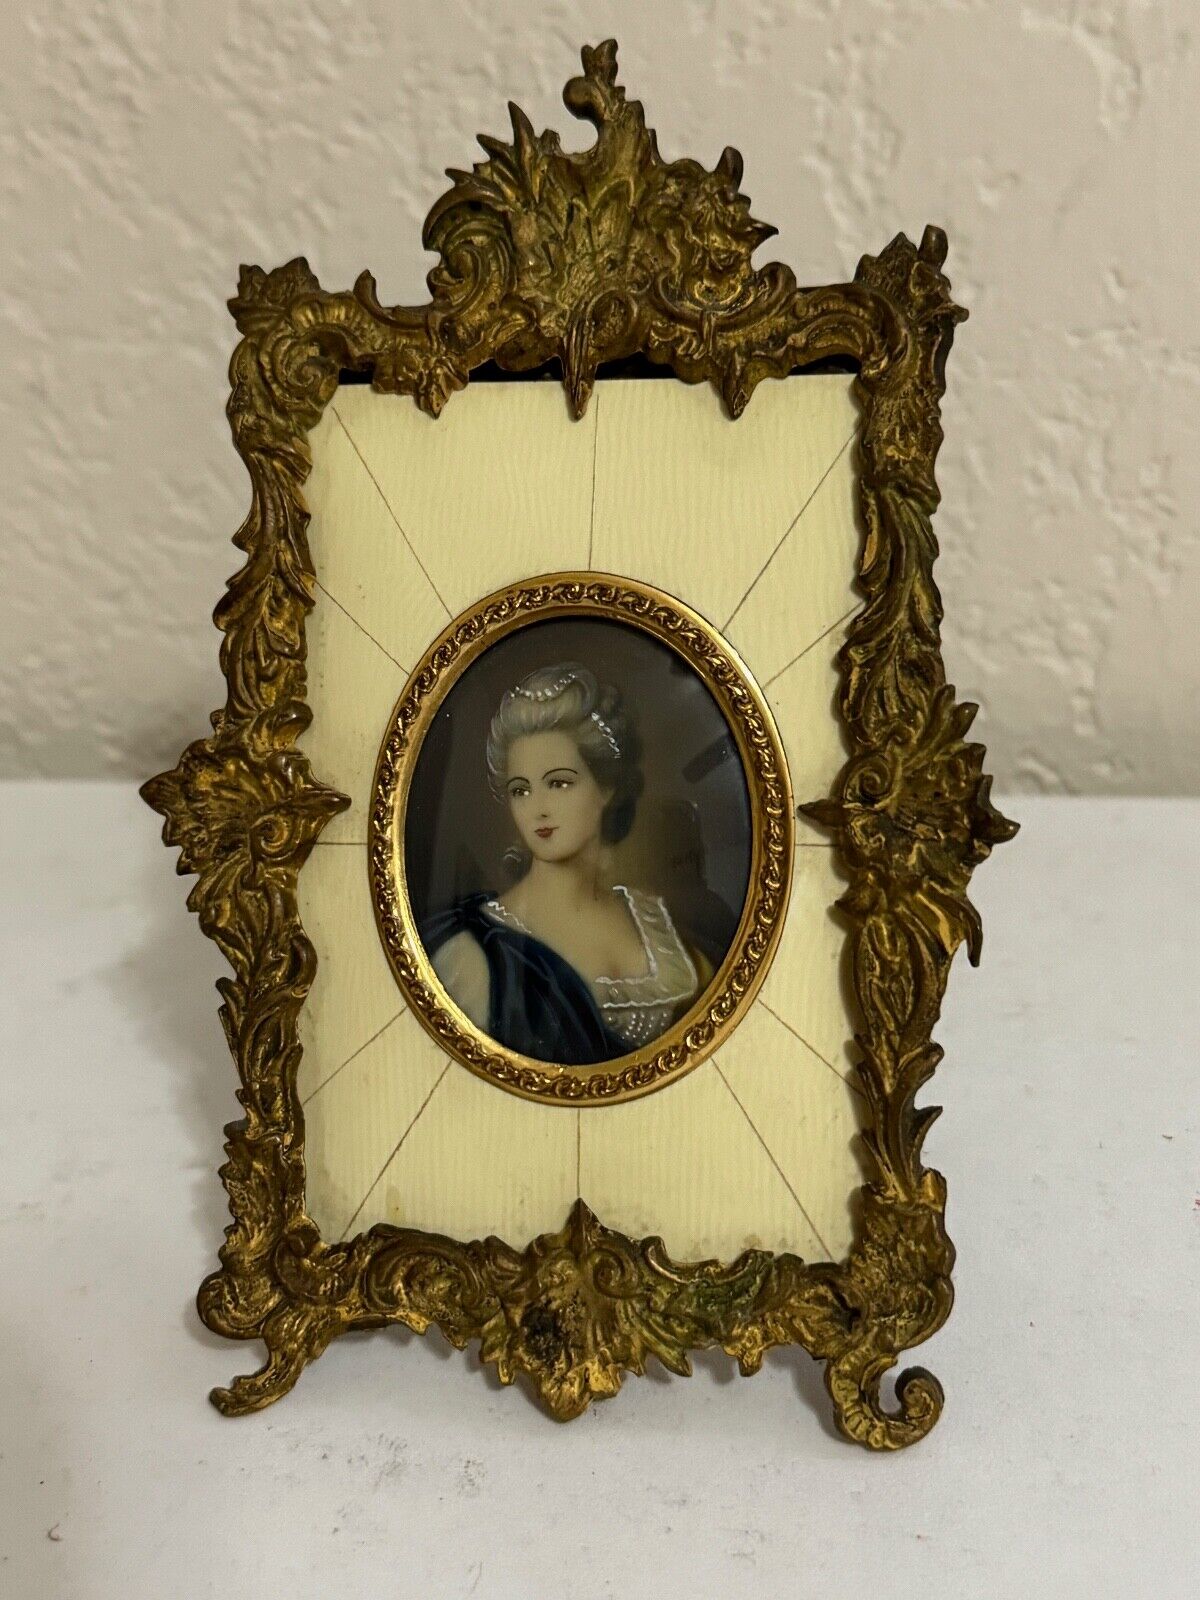 Antique Signed Small Portrait Plaque of Woman in Ornate Brass Frame